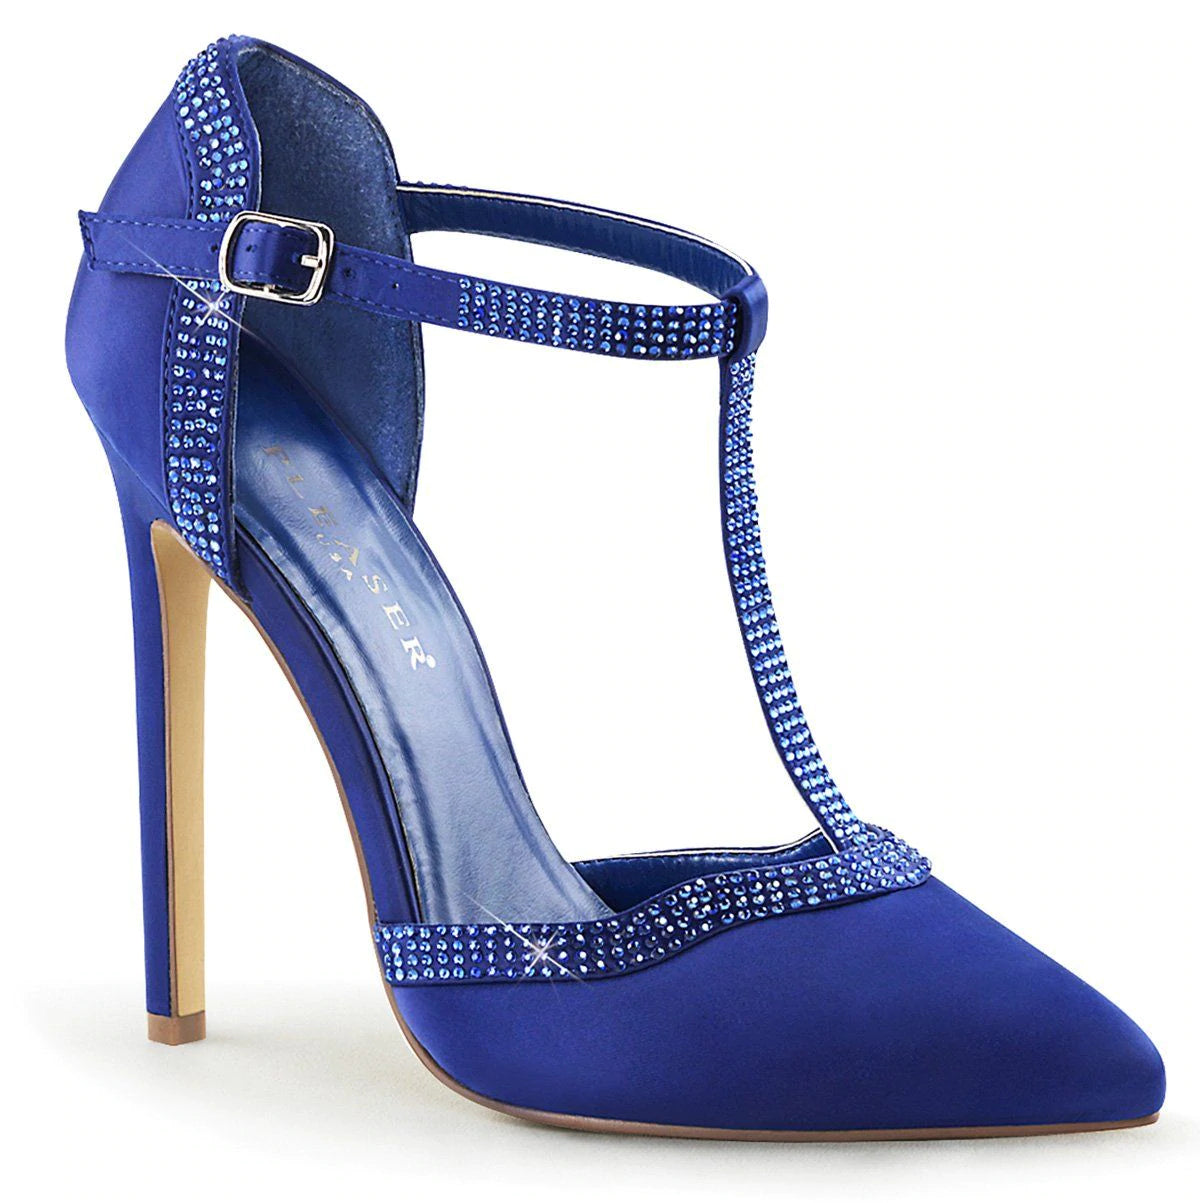 Royal Blue Satin Chunky Heel Boots Pointy Toe Ankle Boots with  Chain|FSJshoes